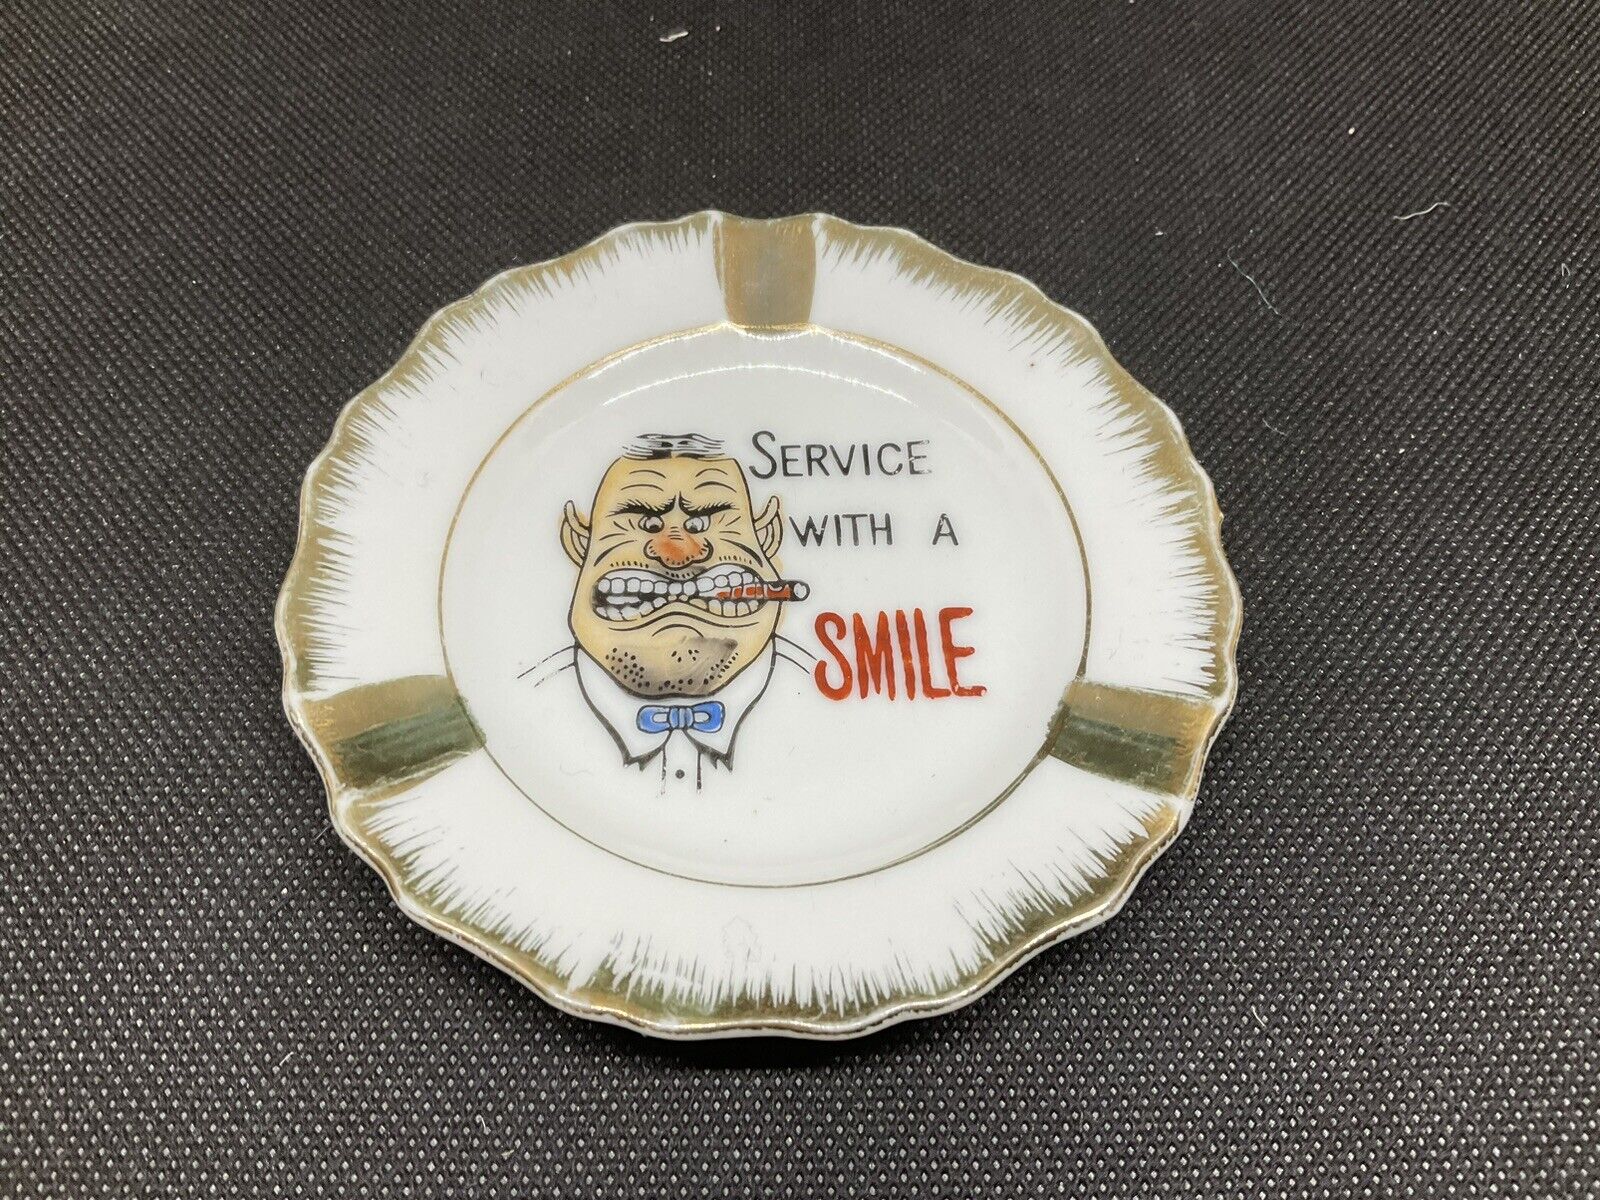 Vintage Humorous Novelty Ashtray Service, With A Smile Kitschy